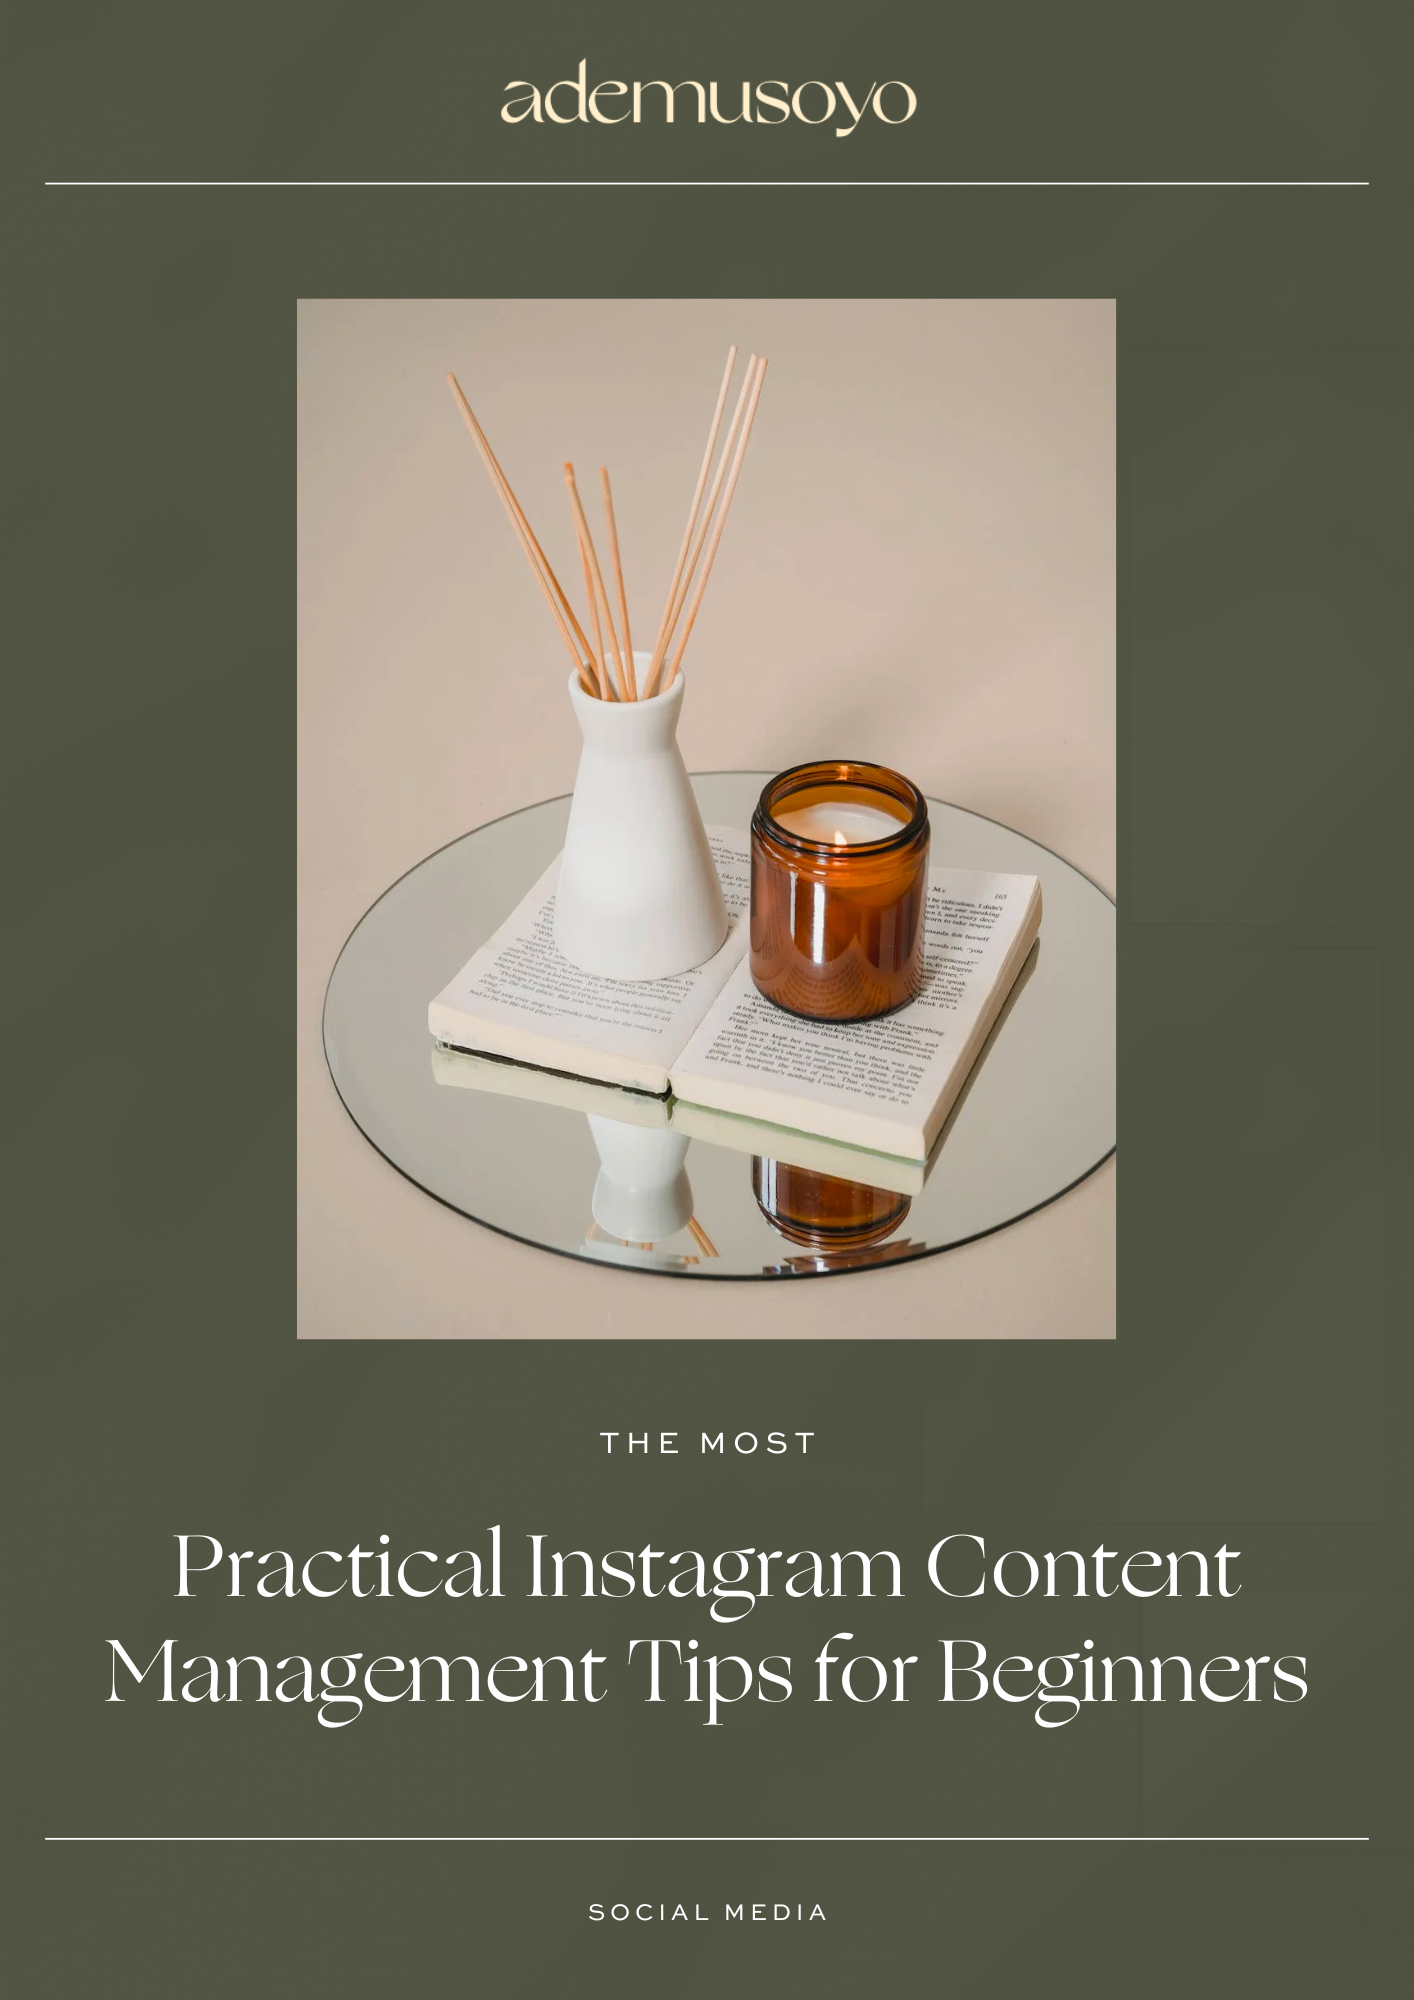 The Most Practical Instagram Content Management Tips for Beginners